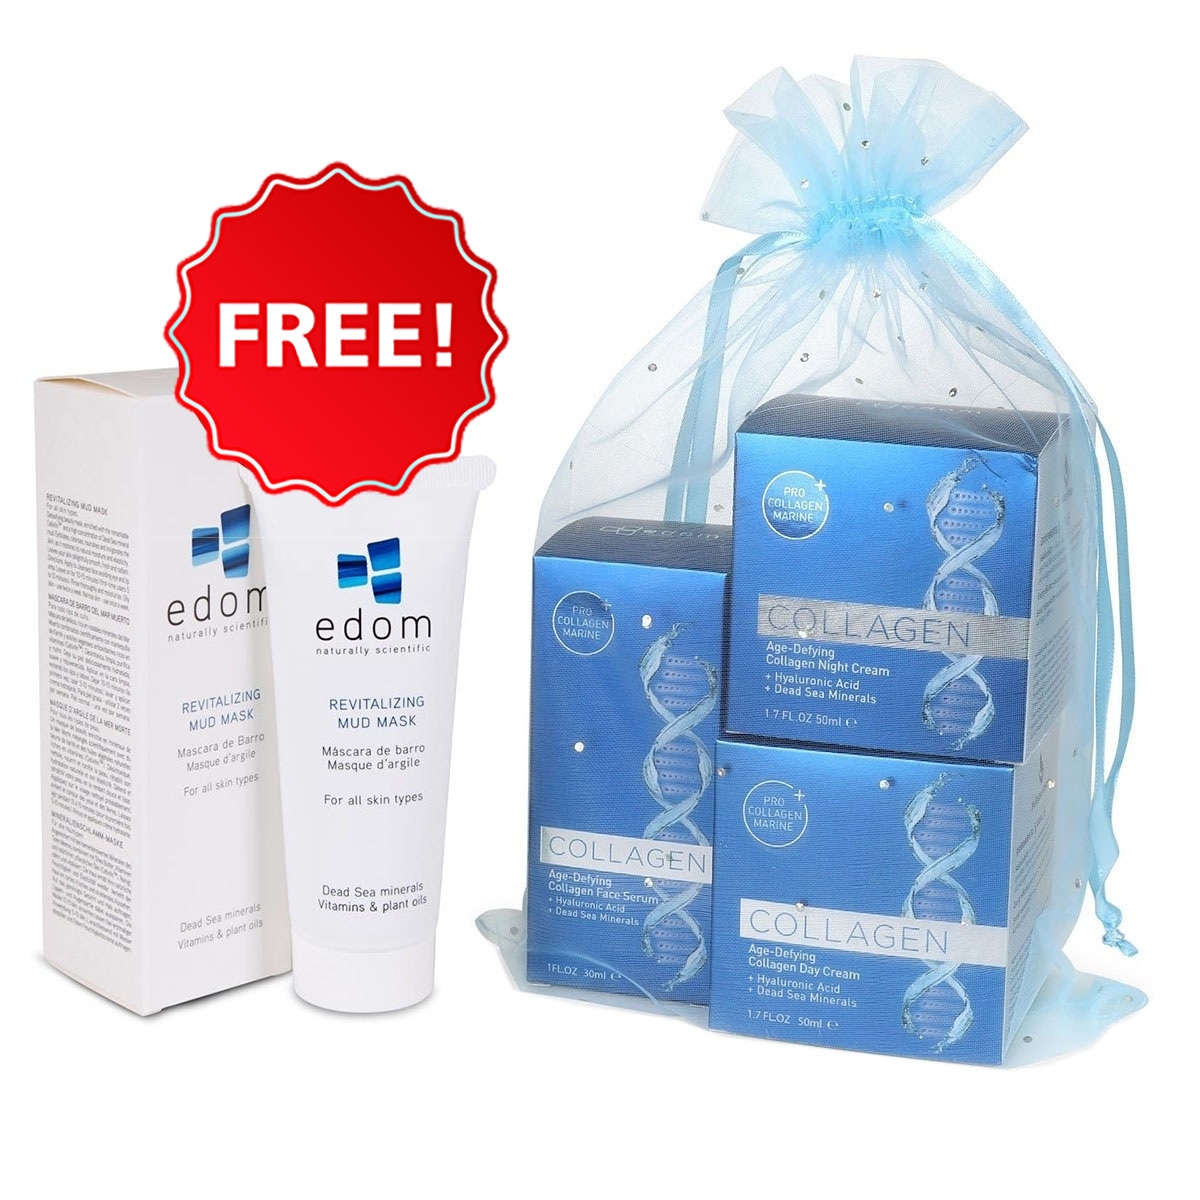 Edom Age-Defying Facial Set: Day Cream, Night Cream, Face Serum - Buy This Set and Get Revitalizing Mud Mask For FREE!!! - 1